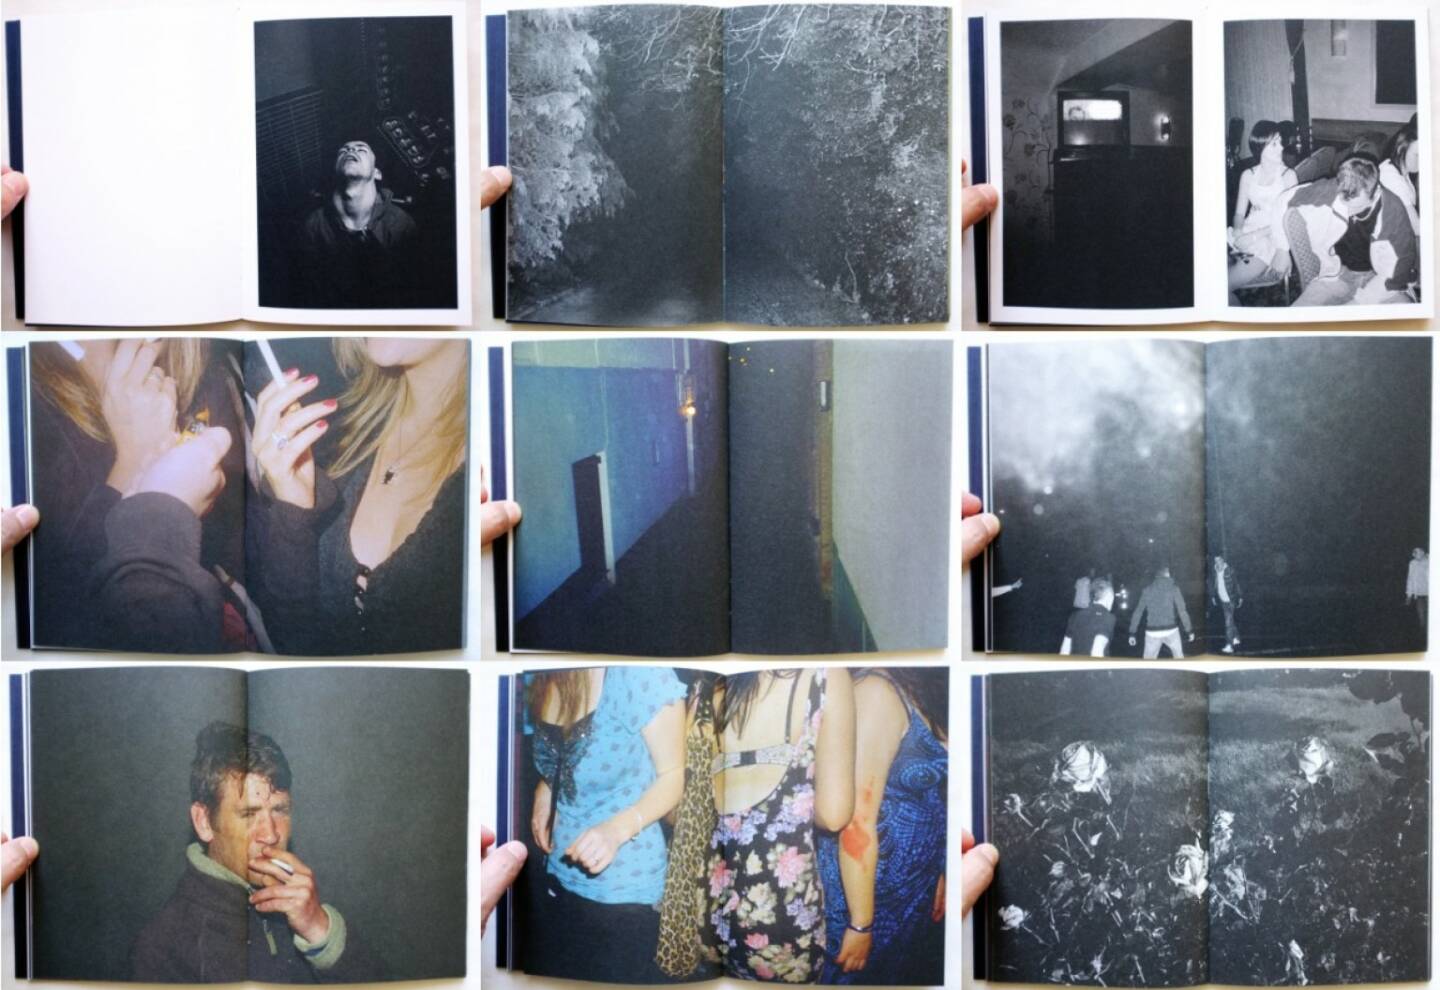 Ciáran Óg Arnold - I went to the worst of bars hoping to get killed. but all I could do was to get drunk again, MACK 2015, Beispielseiten, sample spreads - http://josefchladek.com/book/ciaran_og_arnold_-_i_went_to_the_worst_of_bars_hoping_to_get_killed_but_all_i_could_do_was_to_get_drunk_again